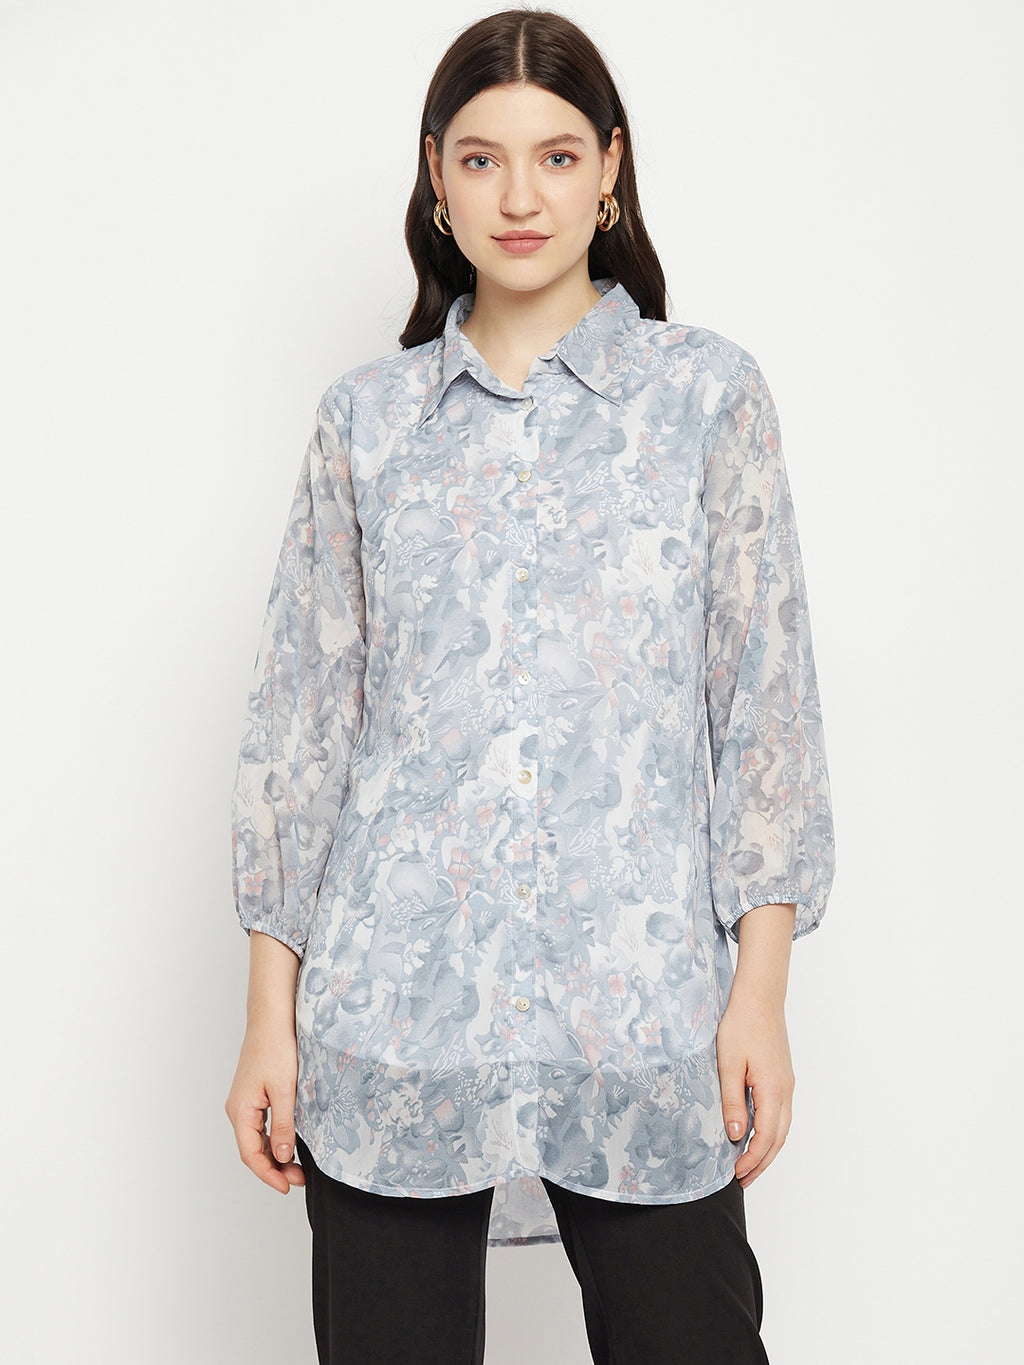 Casual Puff Sleeves Printed Women Blue, White Top